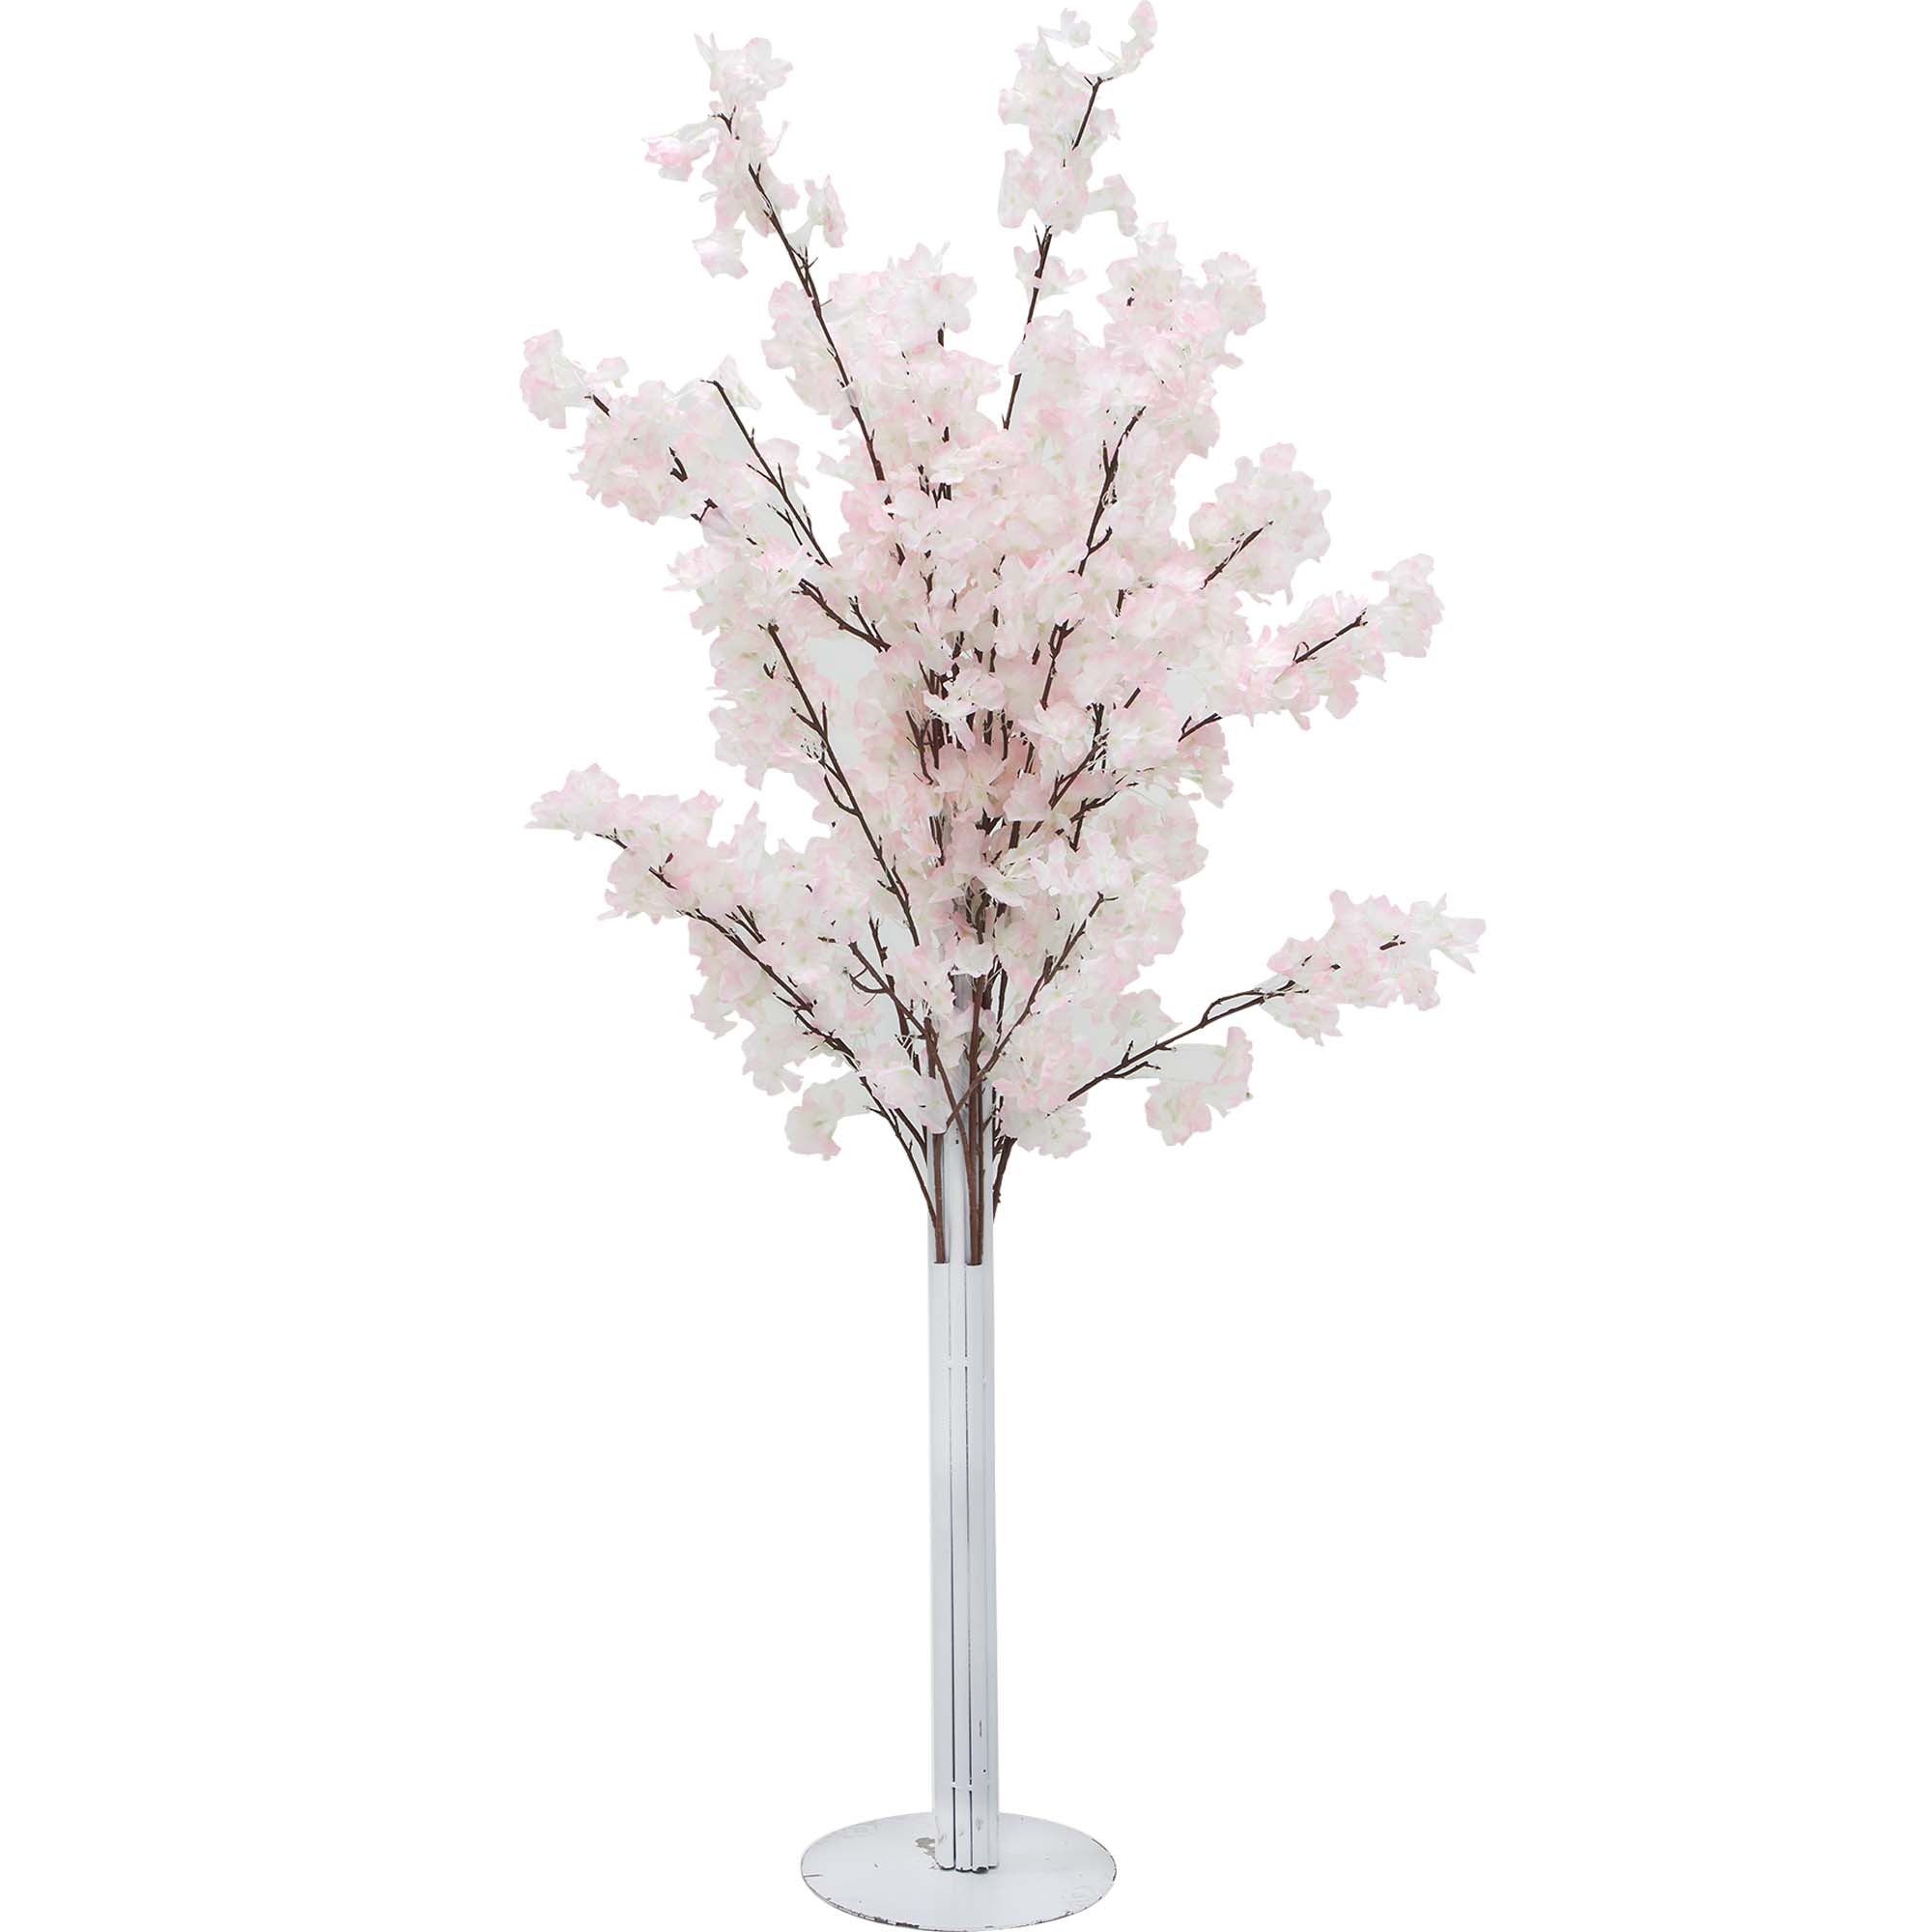 Artificial Flowering Cherry Blossom Tree - Pink